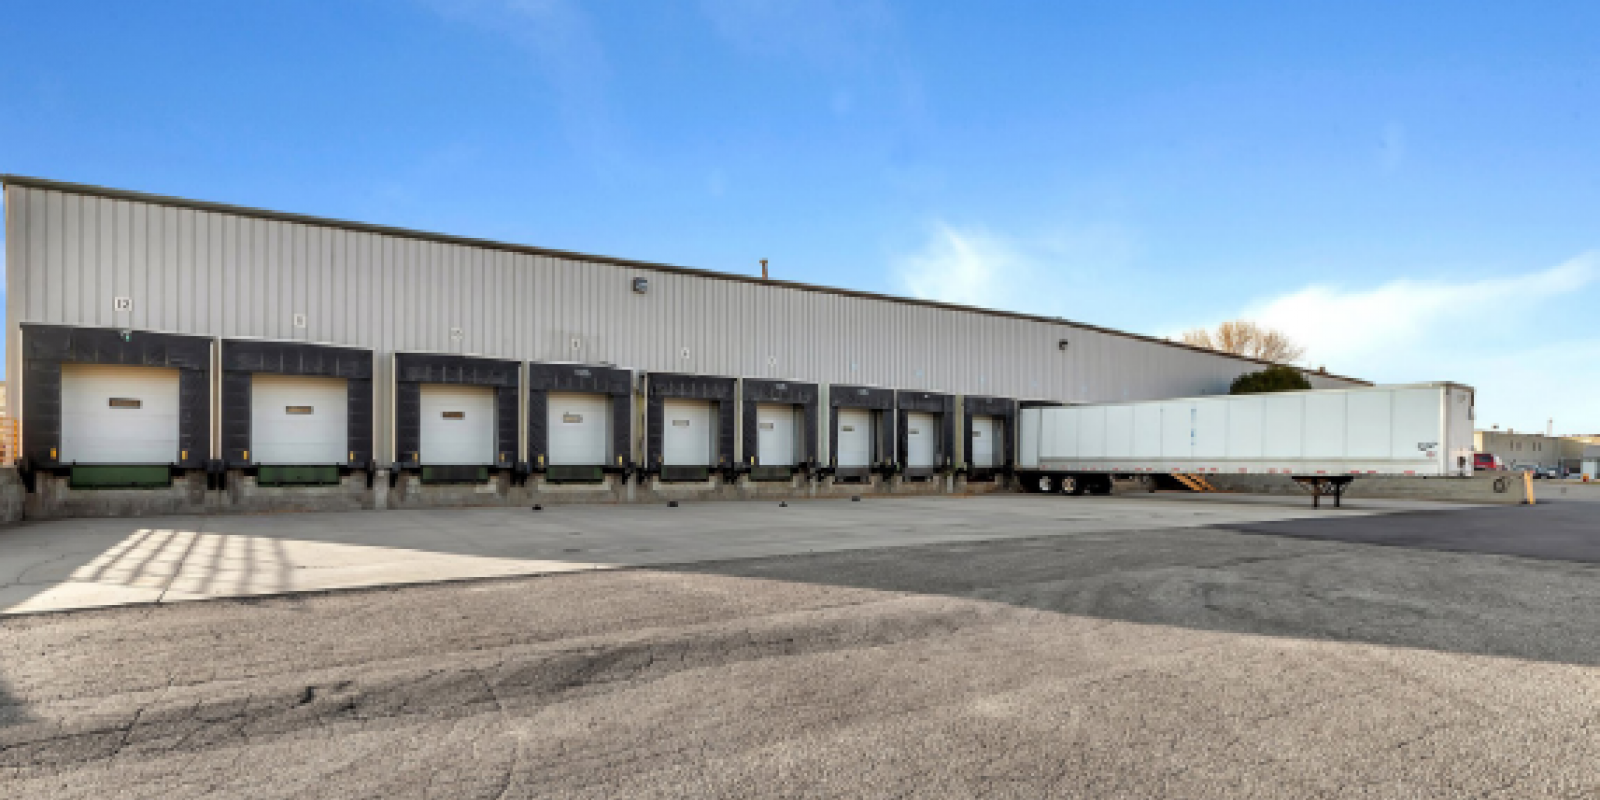 Distribution Center Space Available For Sale and Lease In Sauk Rapids, MN